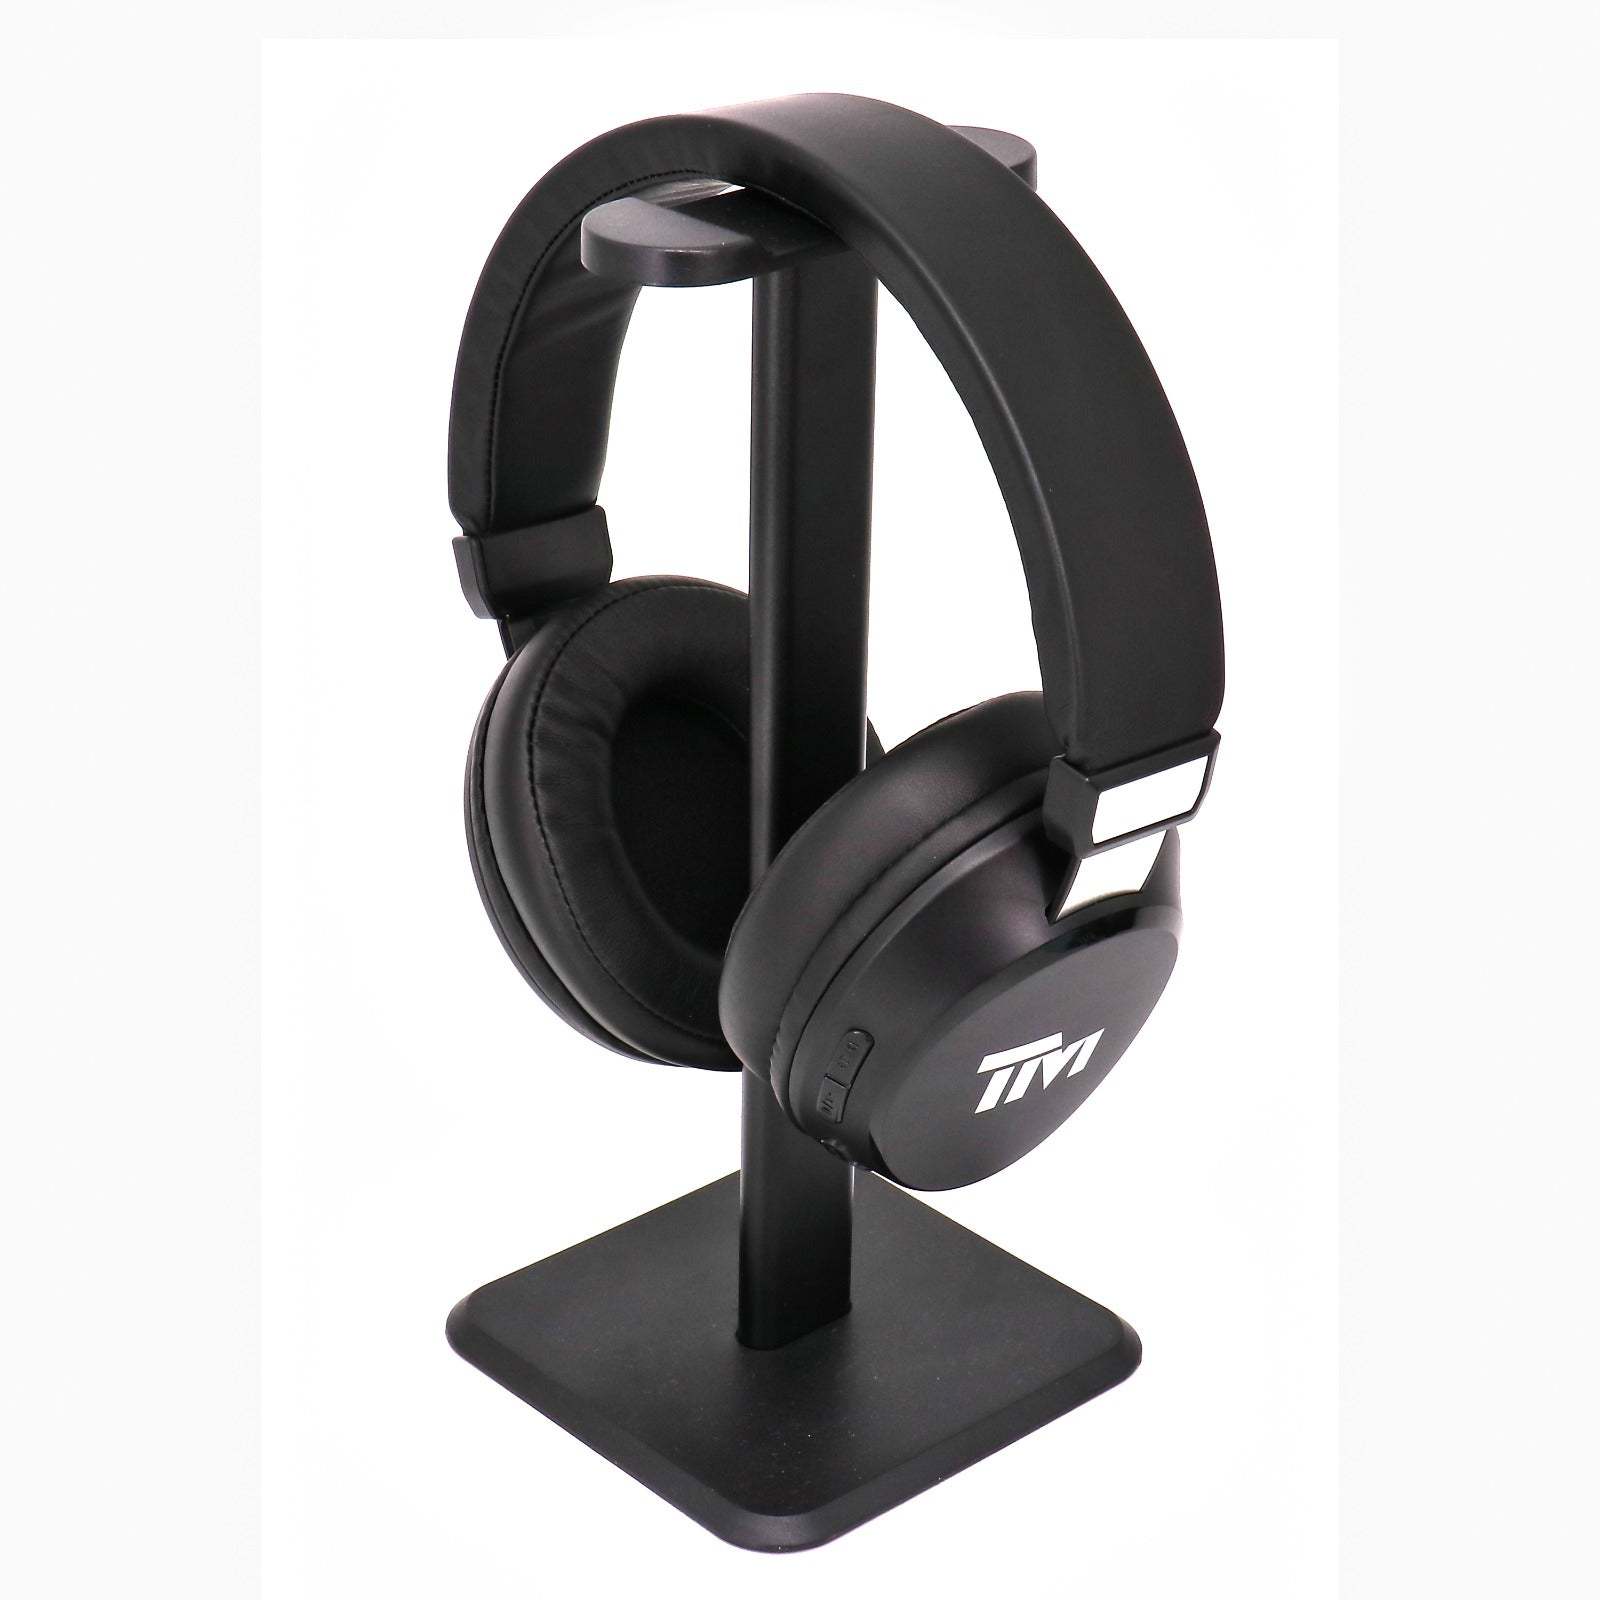 Best wireless gaming headset Twisted Minds G2